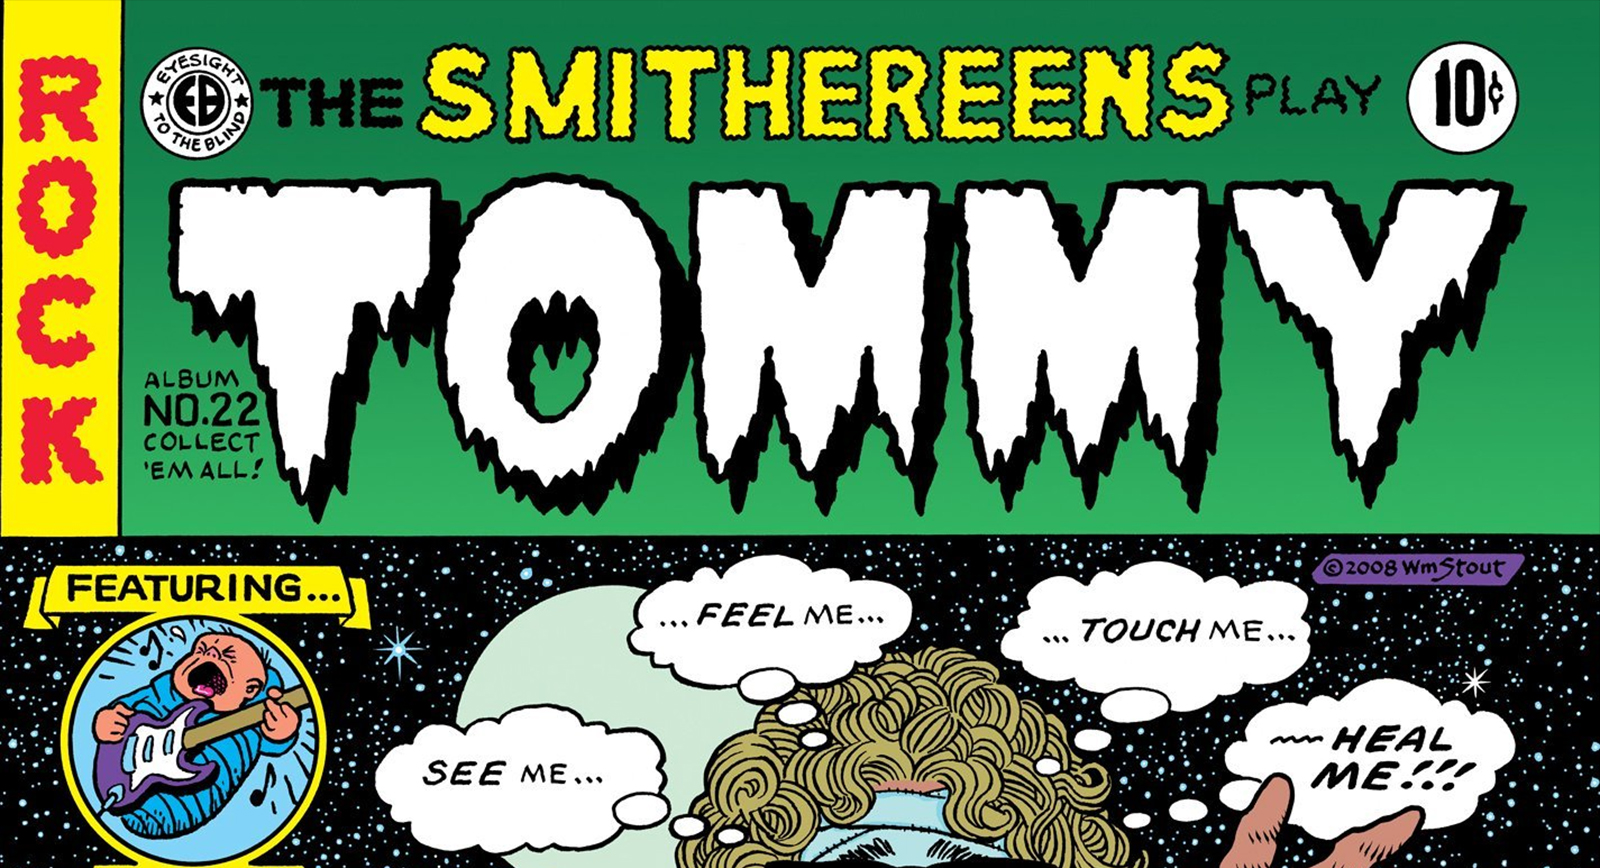 The-Smithereens-Play-Tommy-Tour-2016-Concert-Live-Cities-Dates-Tickets